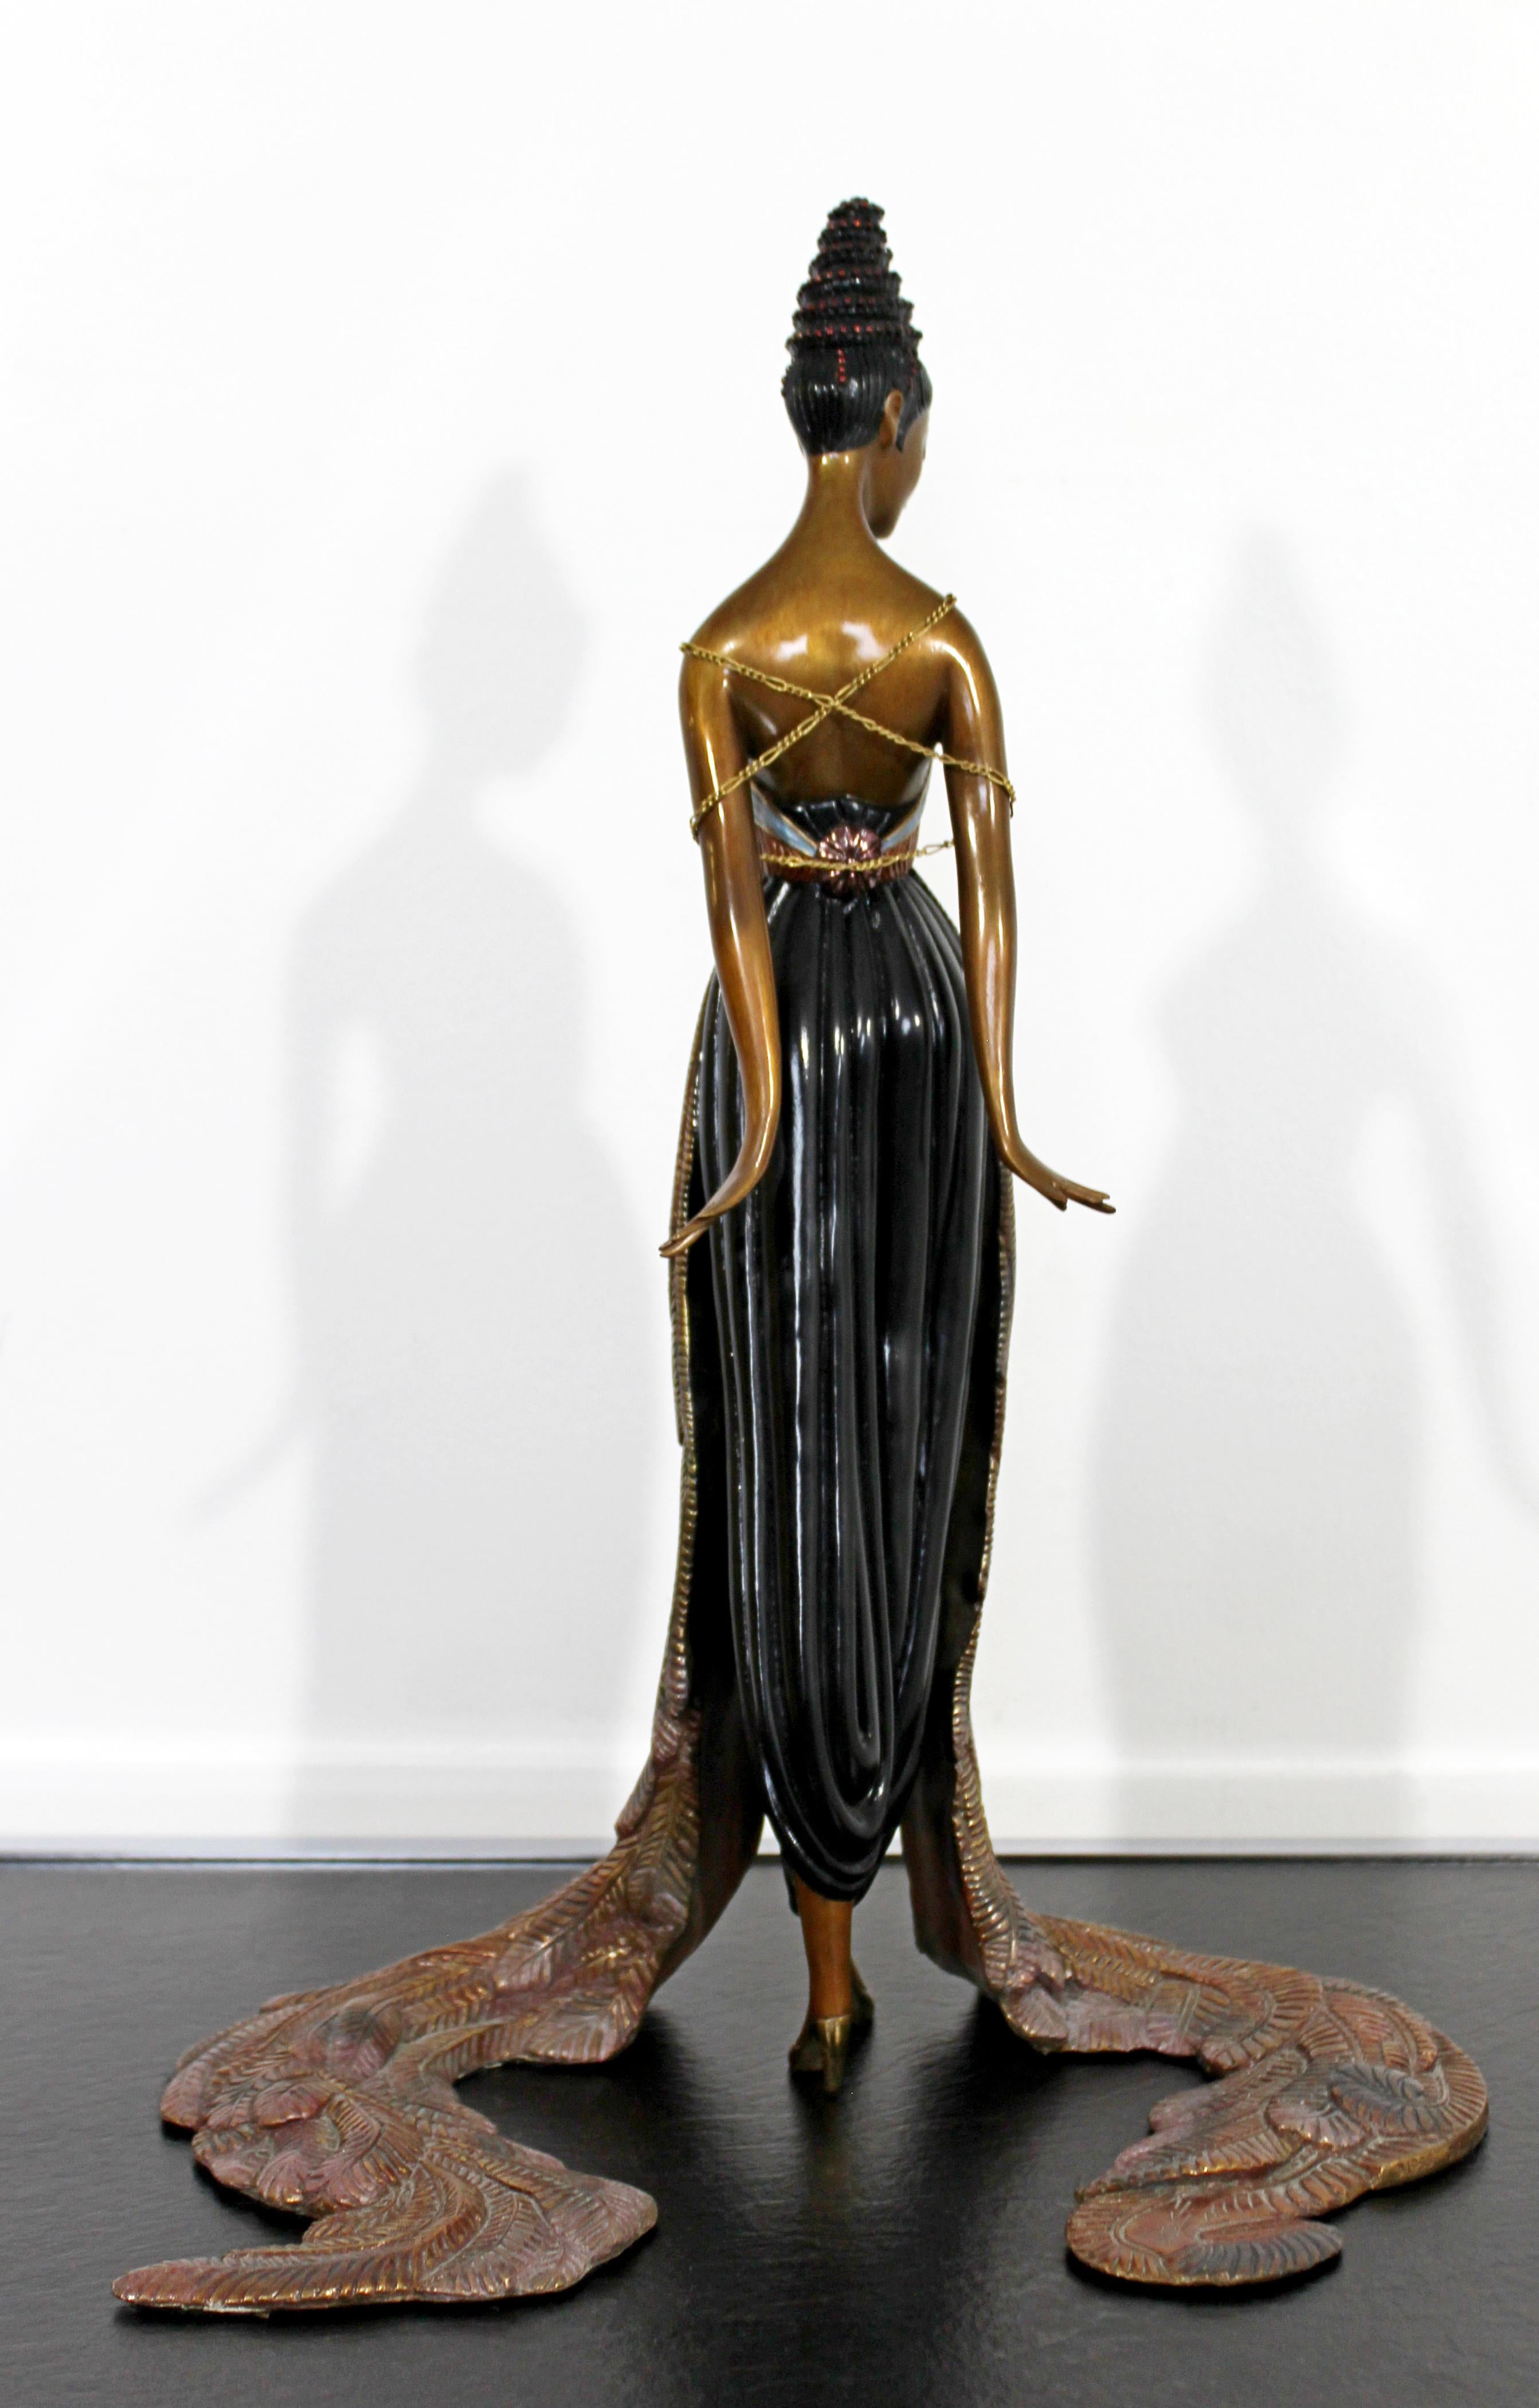 20th Century Art Deco Woman in Feather Gown Bronze Table Sculpture Signed Erte